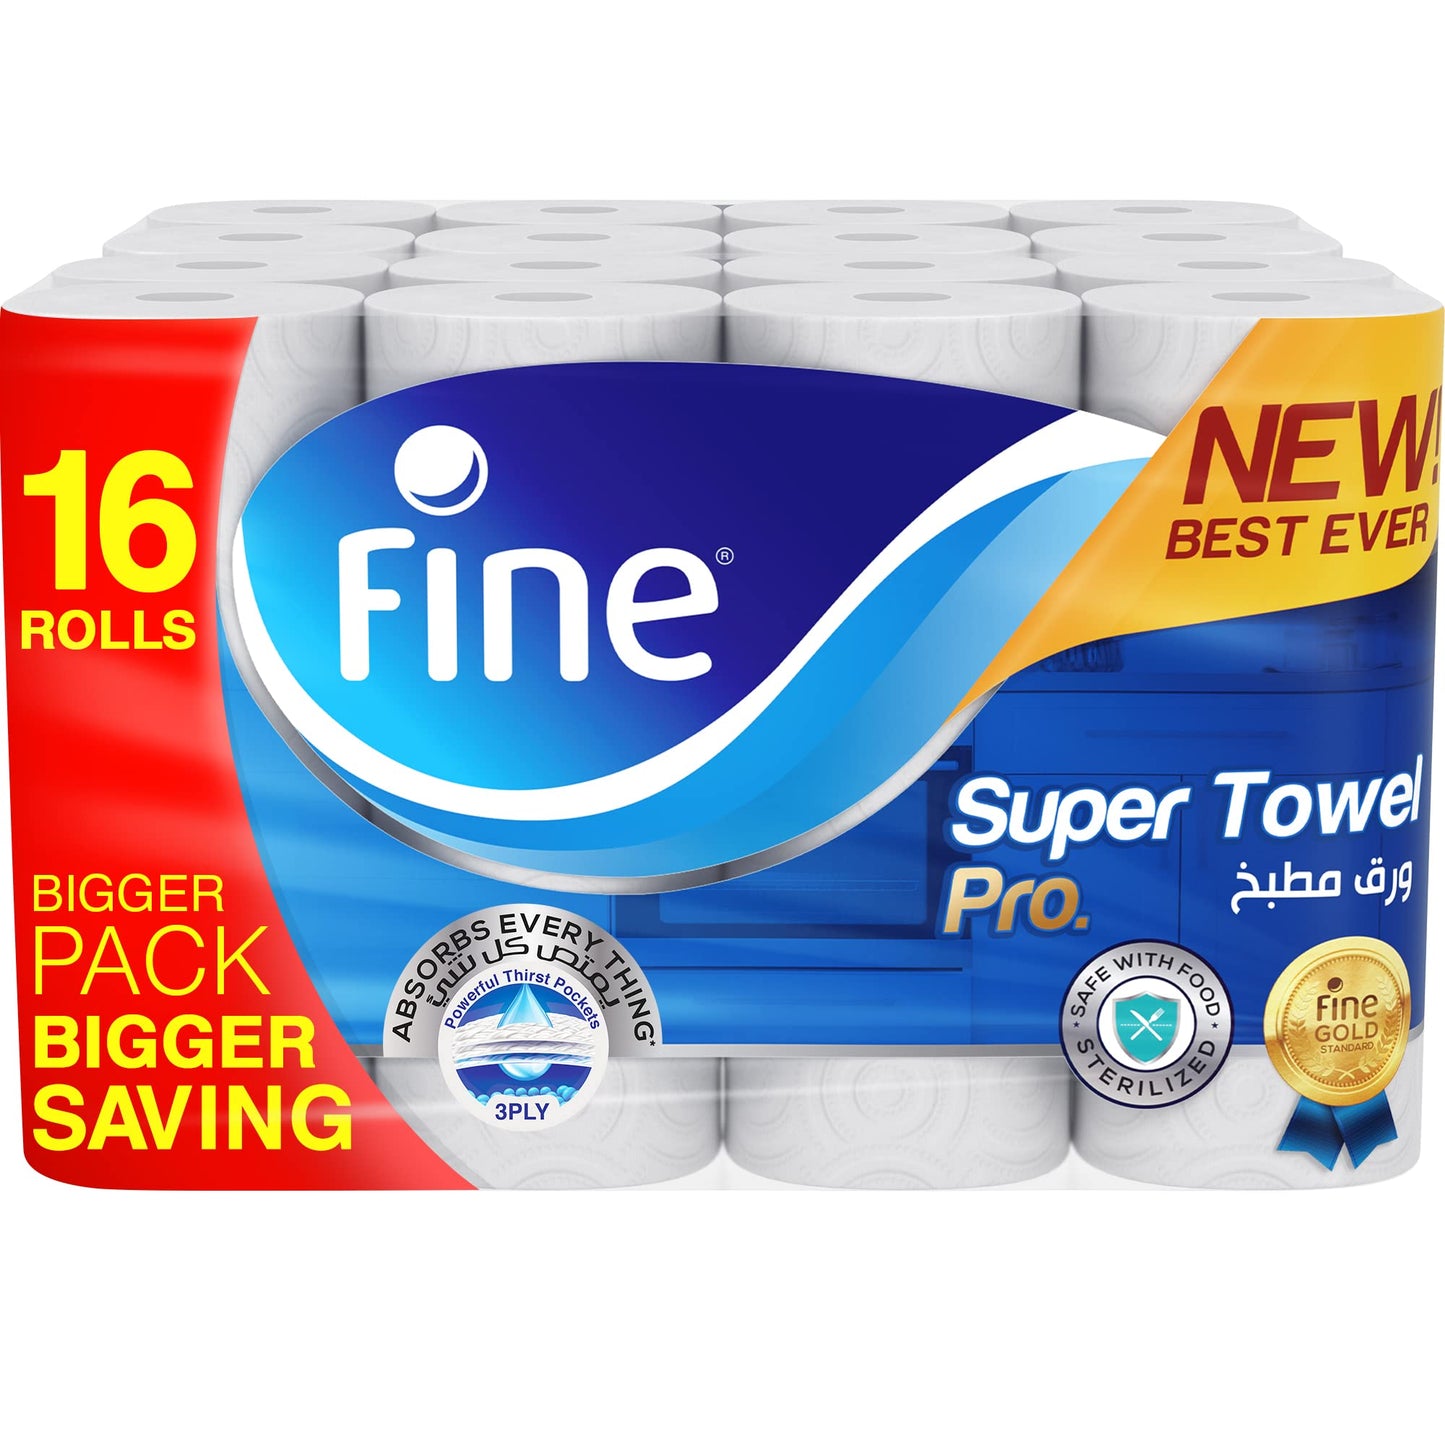 Kitchen paper towel roll, 60 sheets X 3 ply, 16 rolls. Fine® Super Towel Pro, sterilized tissues for germ protection, Half Perforated